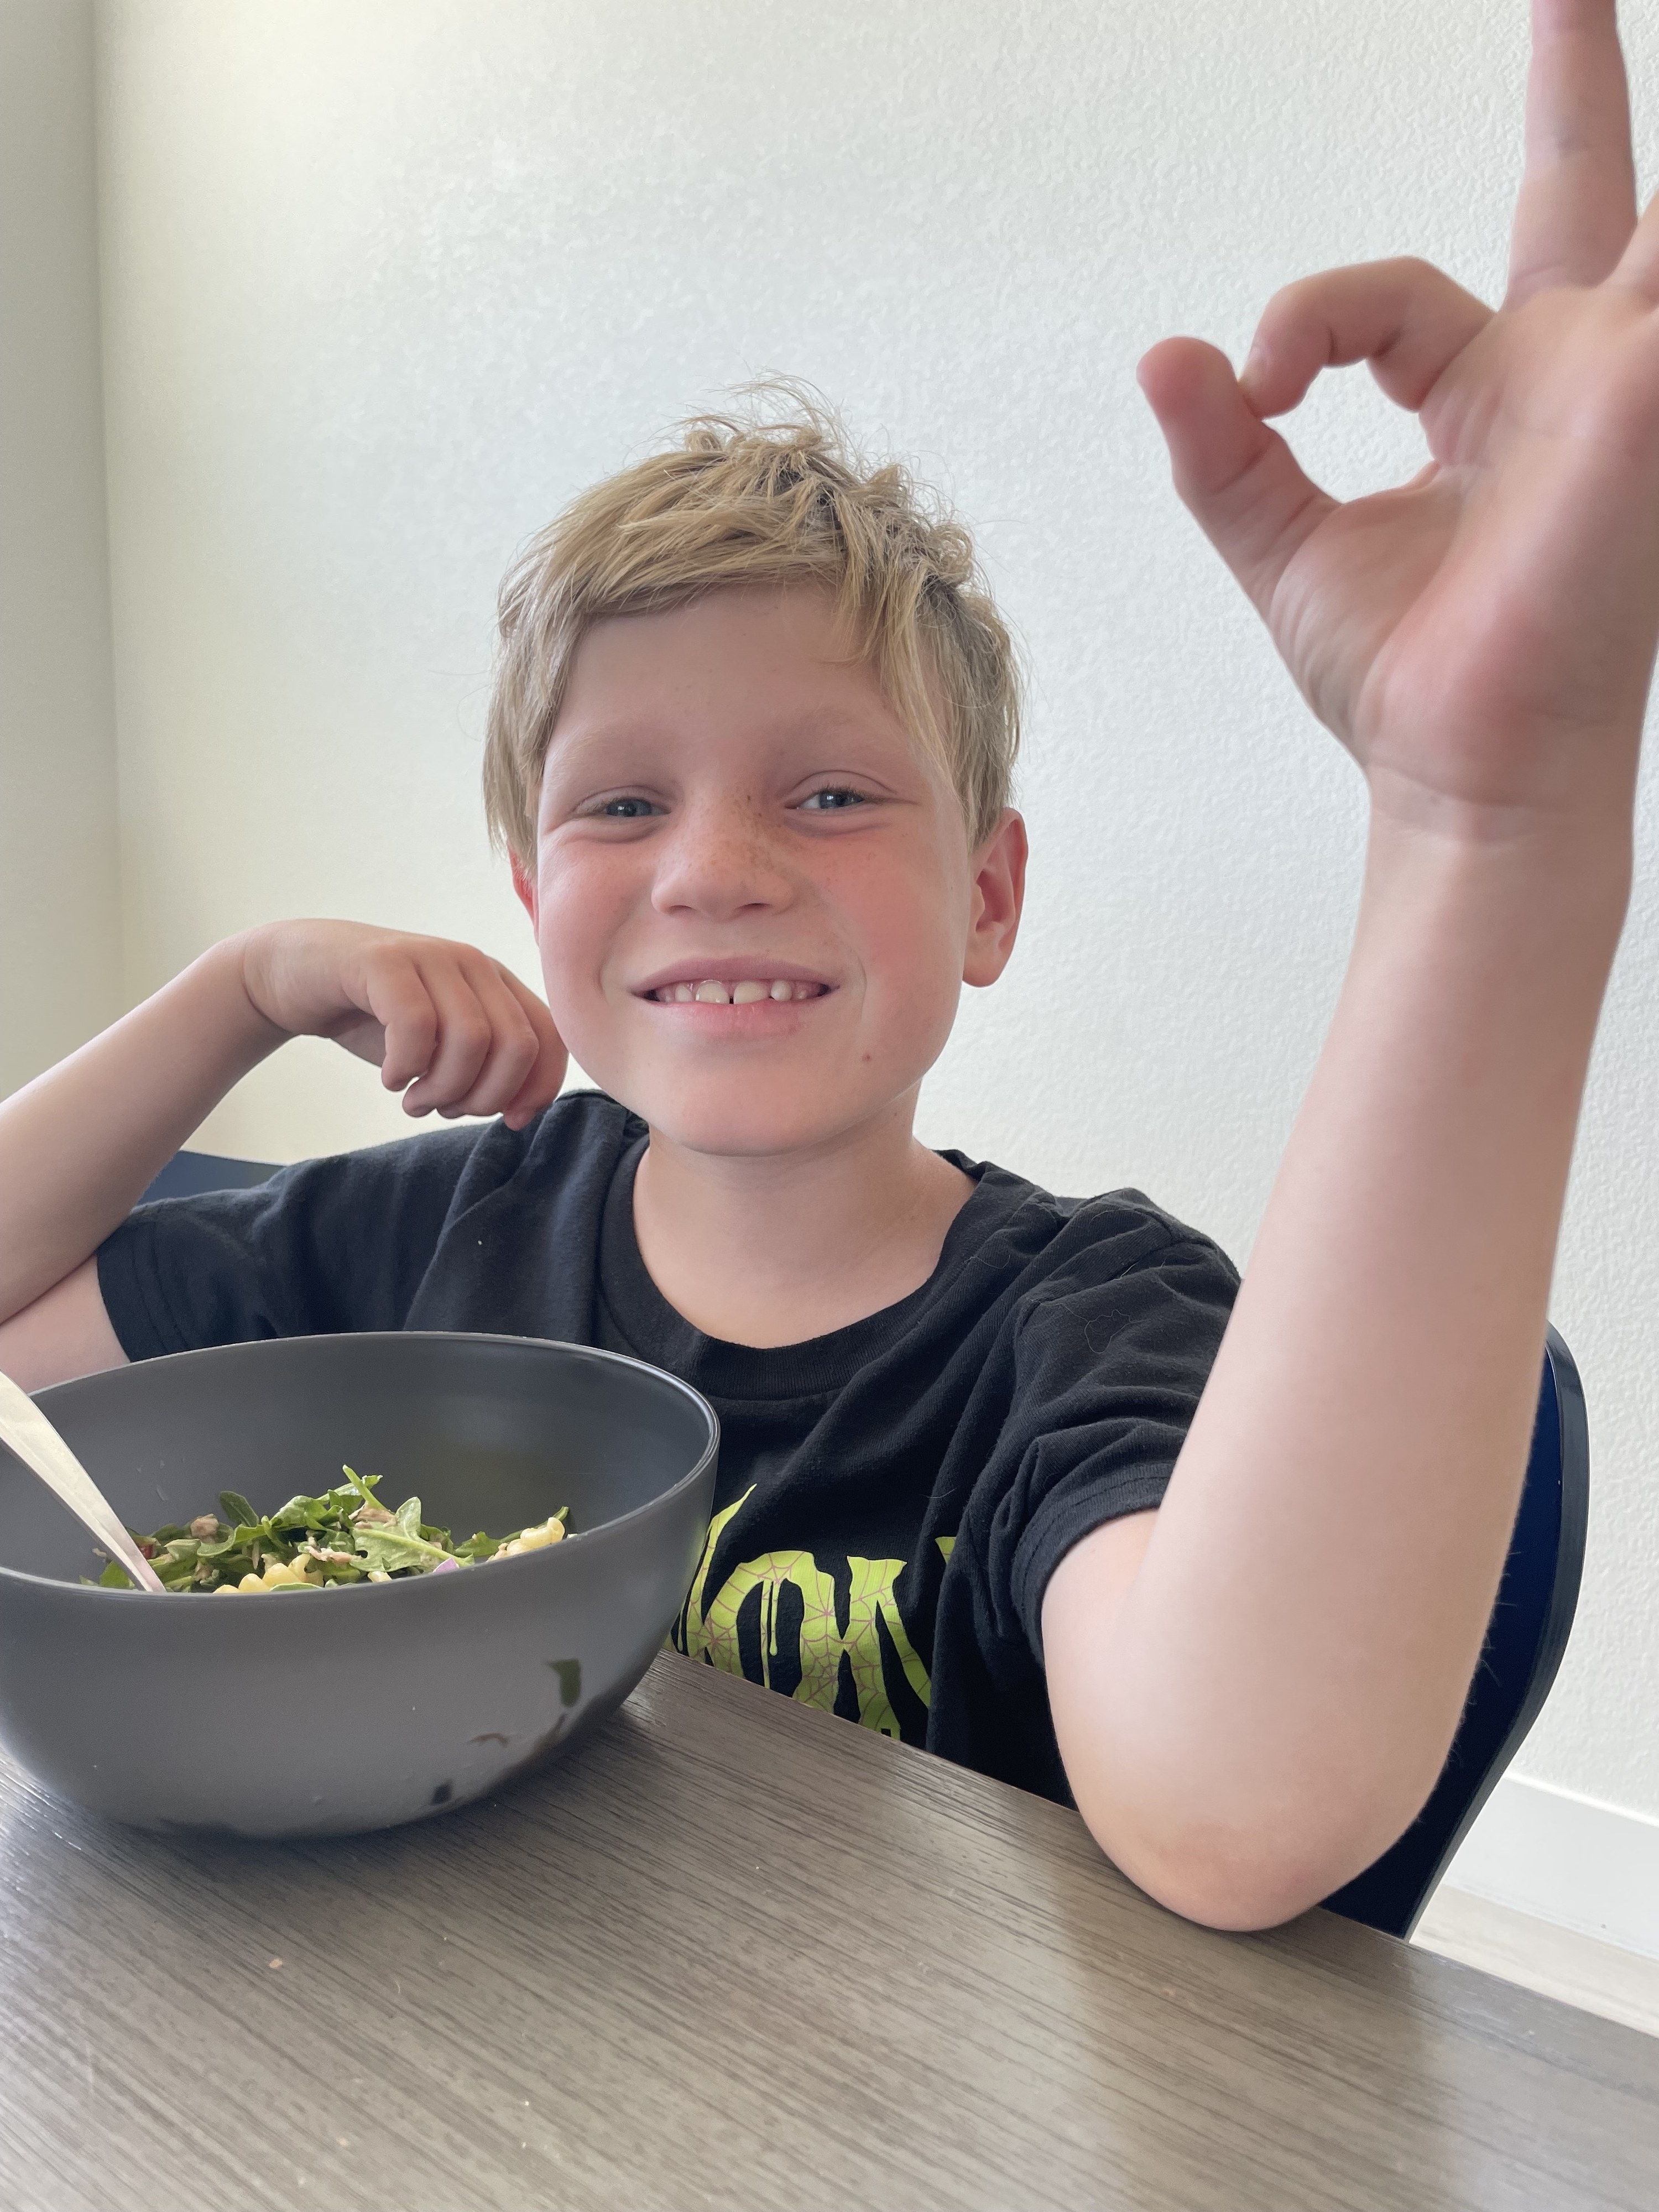 The author&#x27;s son eating lunch and giving an A-OK gesture